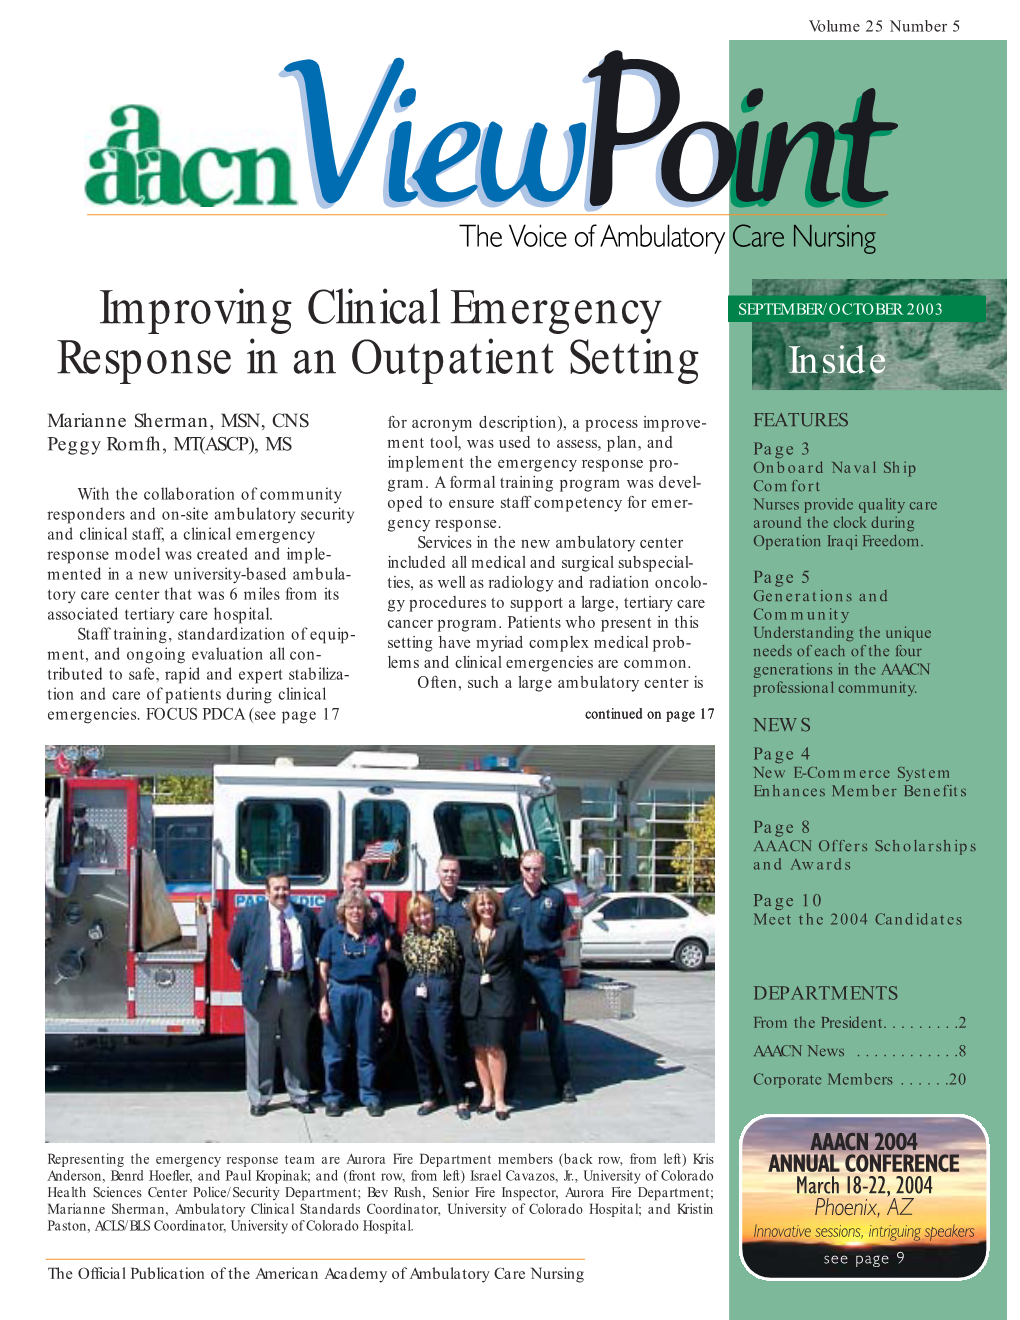 Improving Clinical Emergency Response in an Outpatient Setting